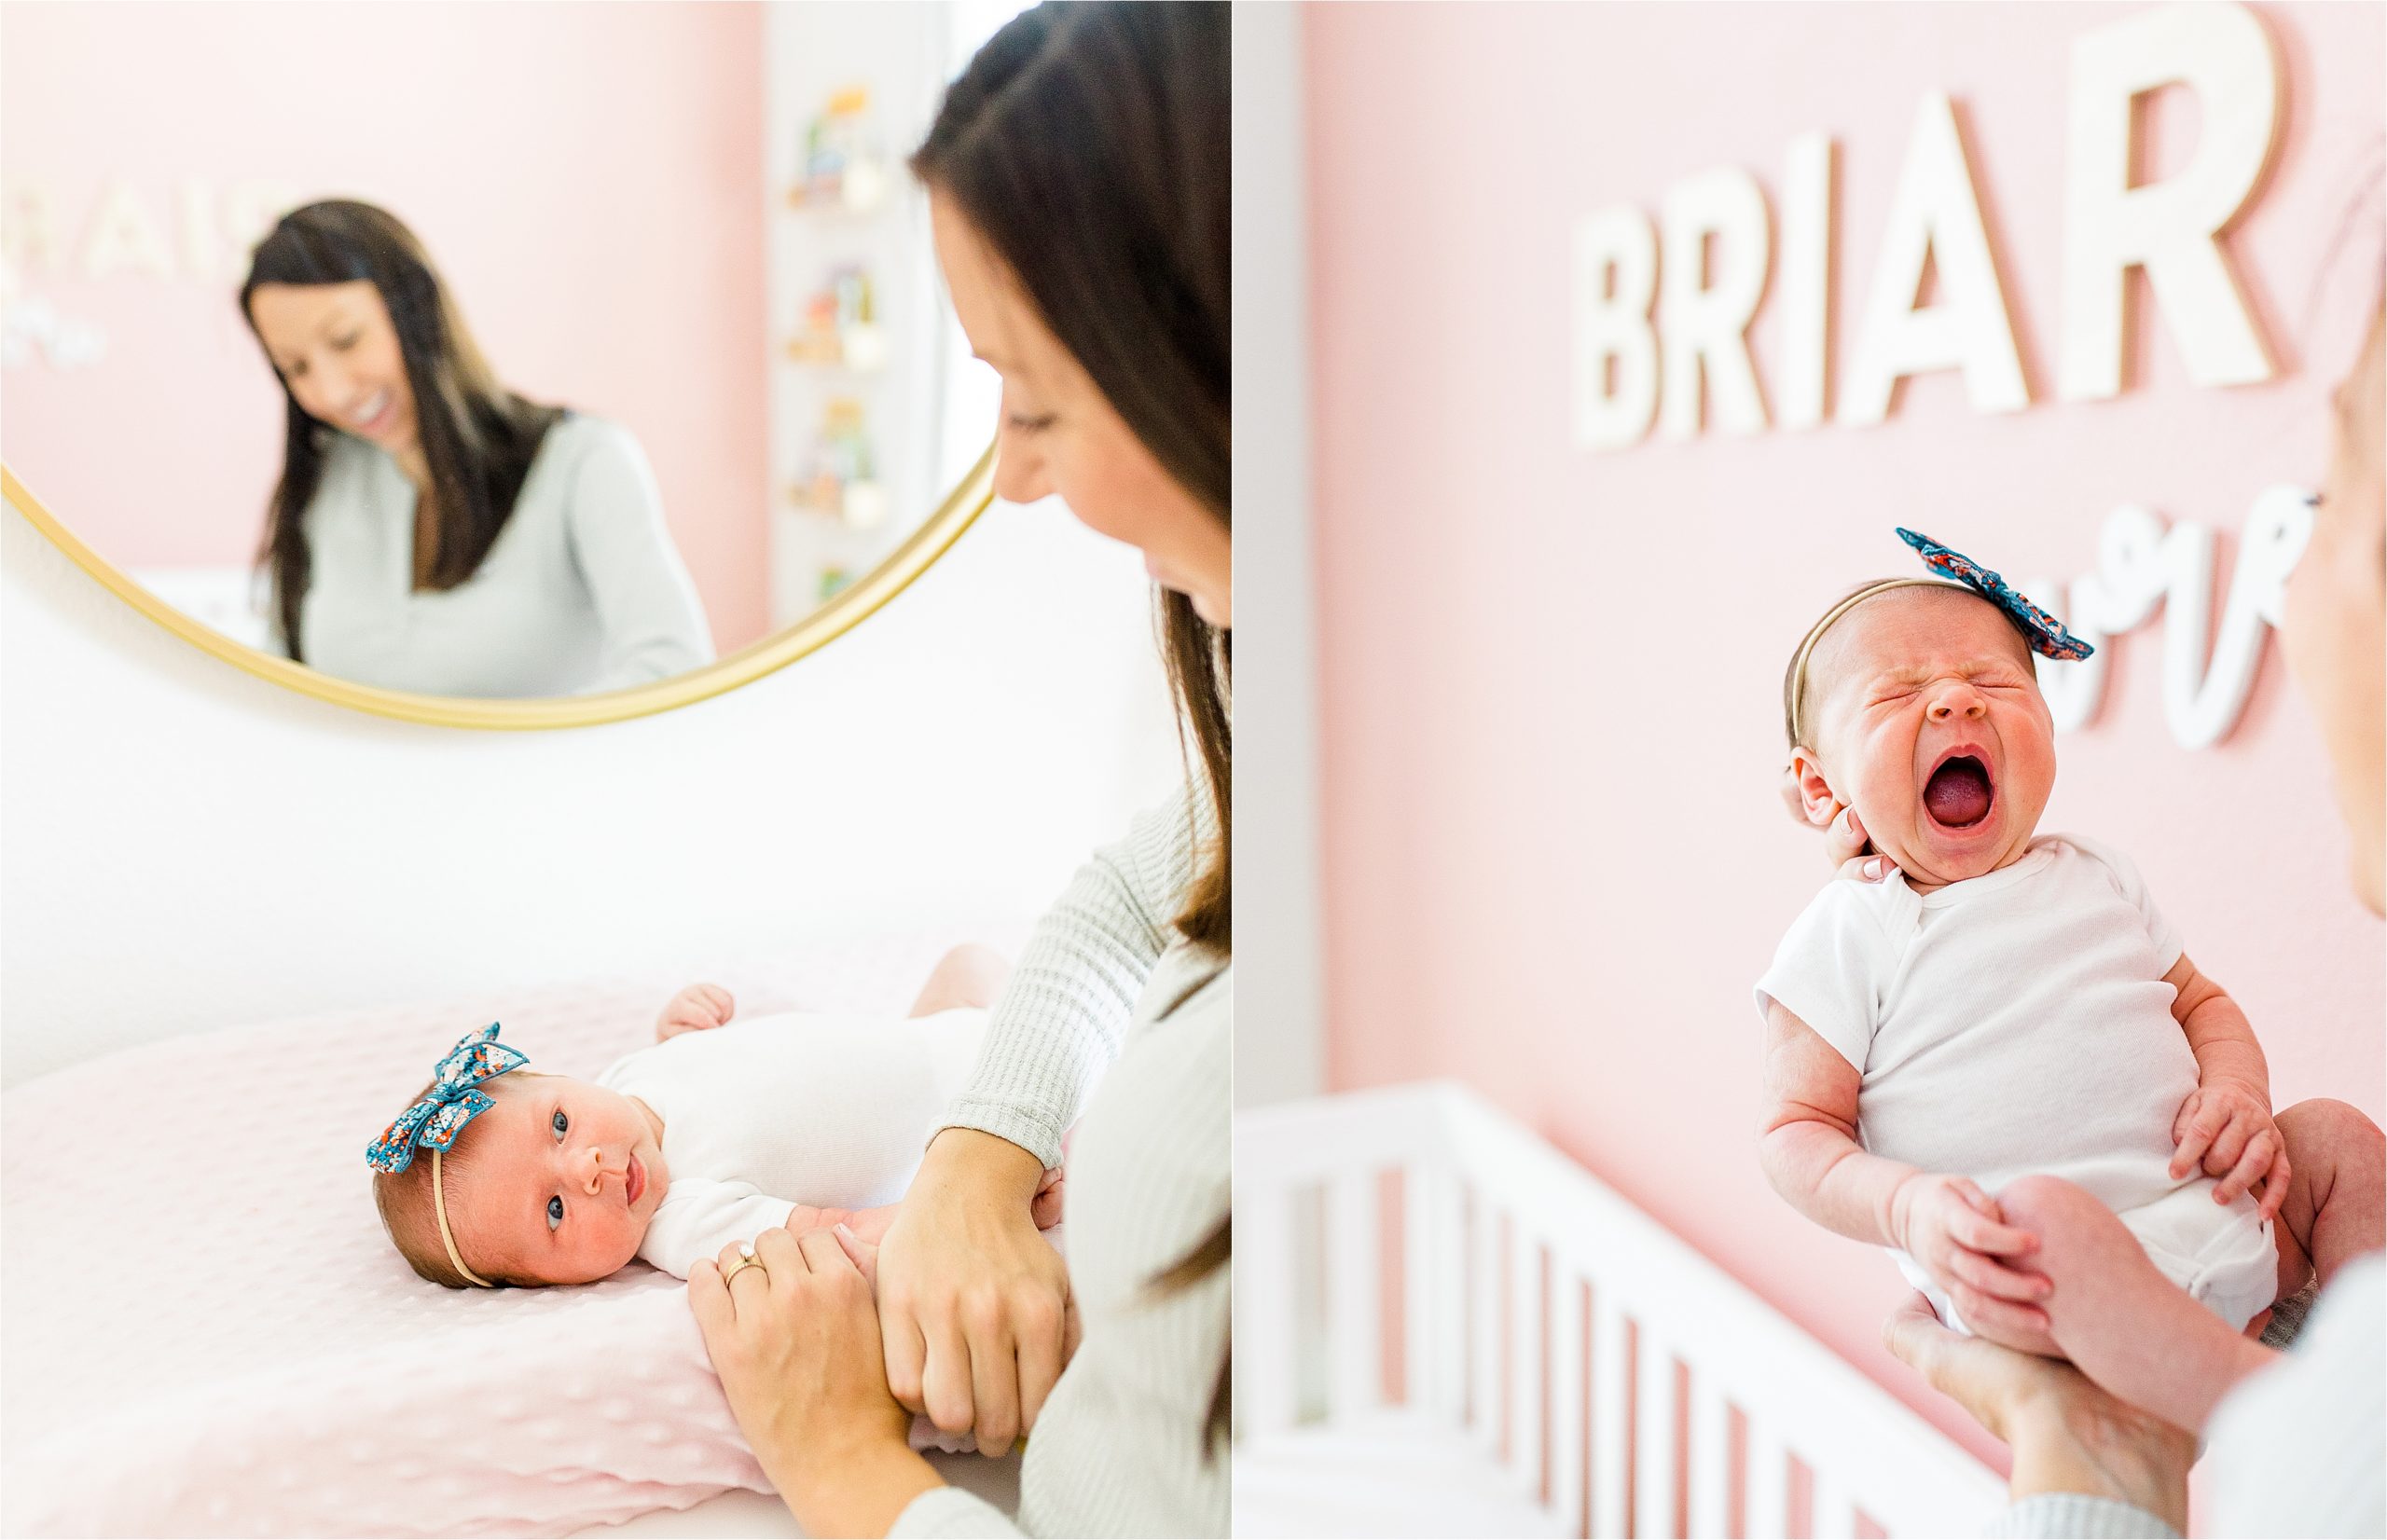 A newborn baby girl yawns and her mom looks on lovingly during their in home newborn photos in a pink nursery